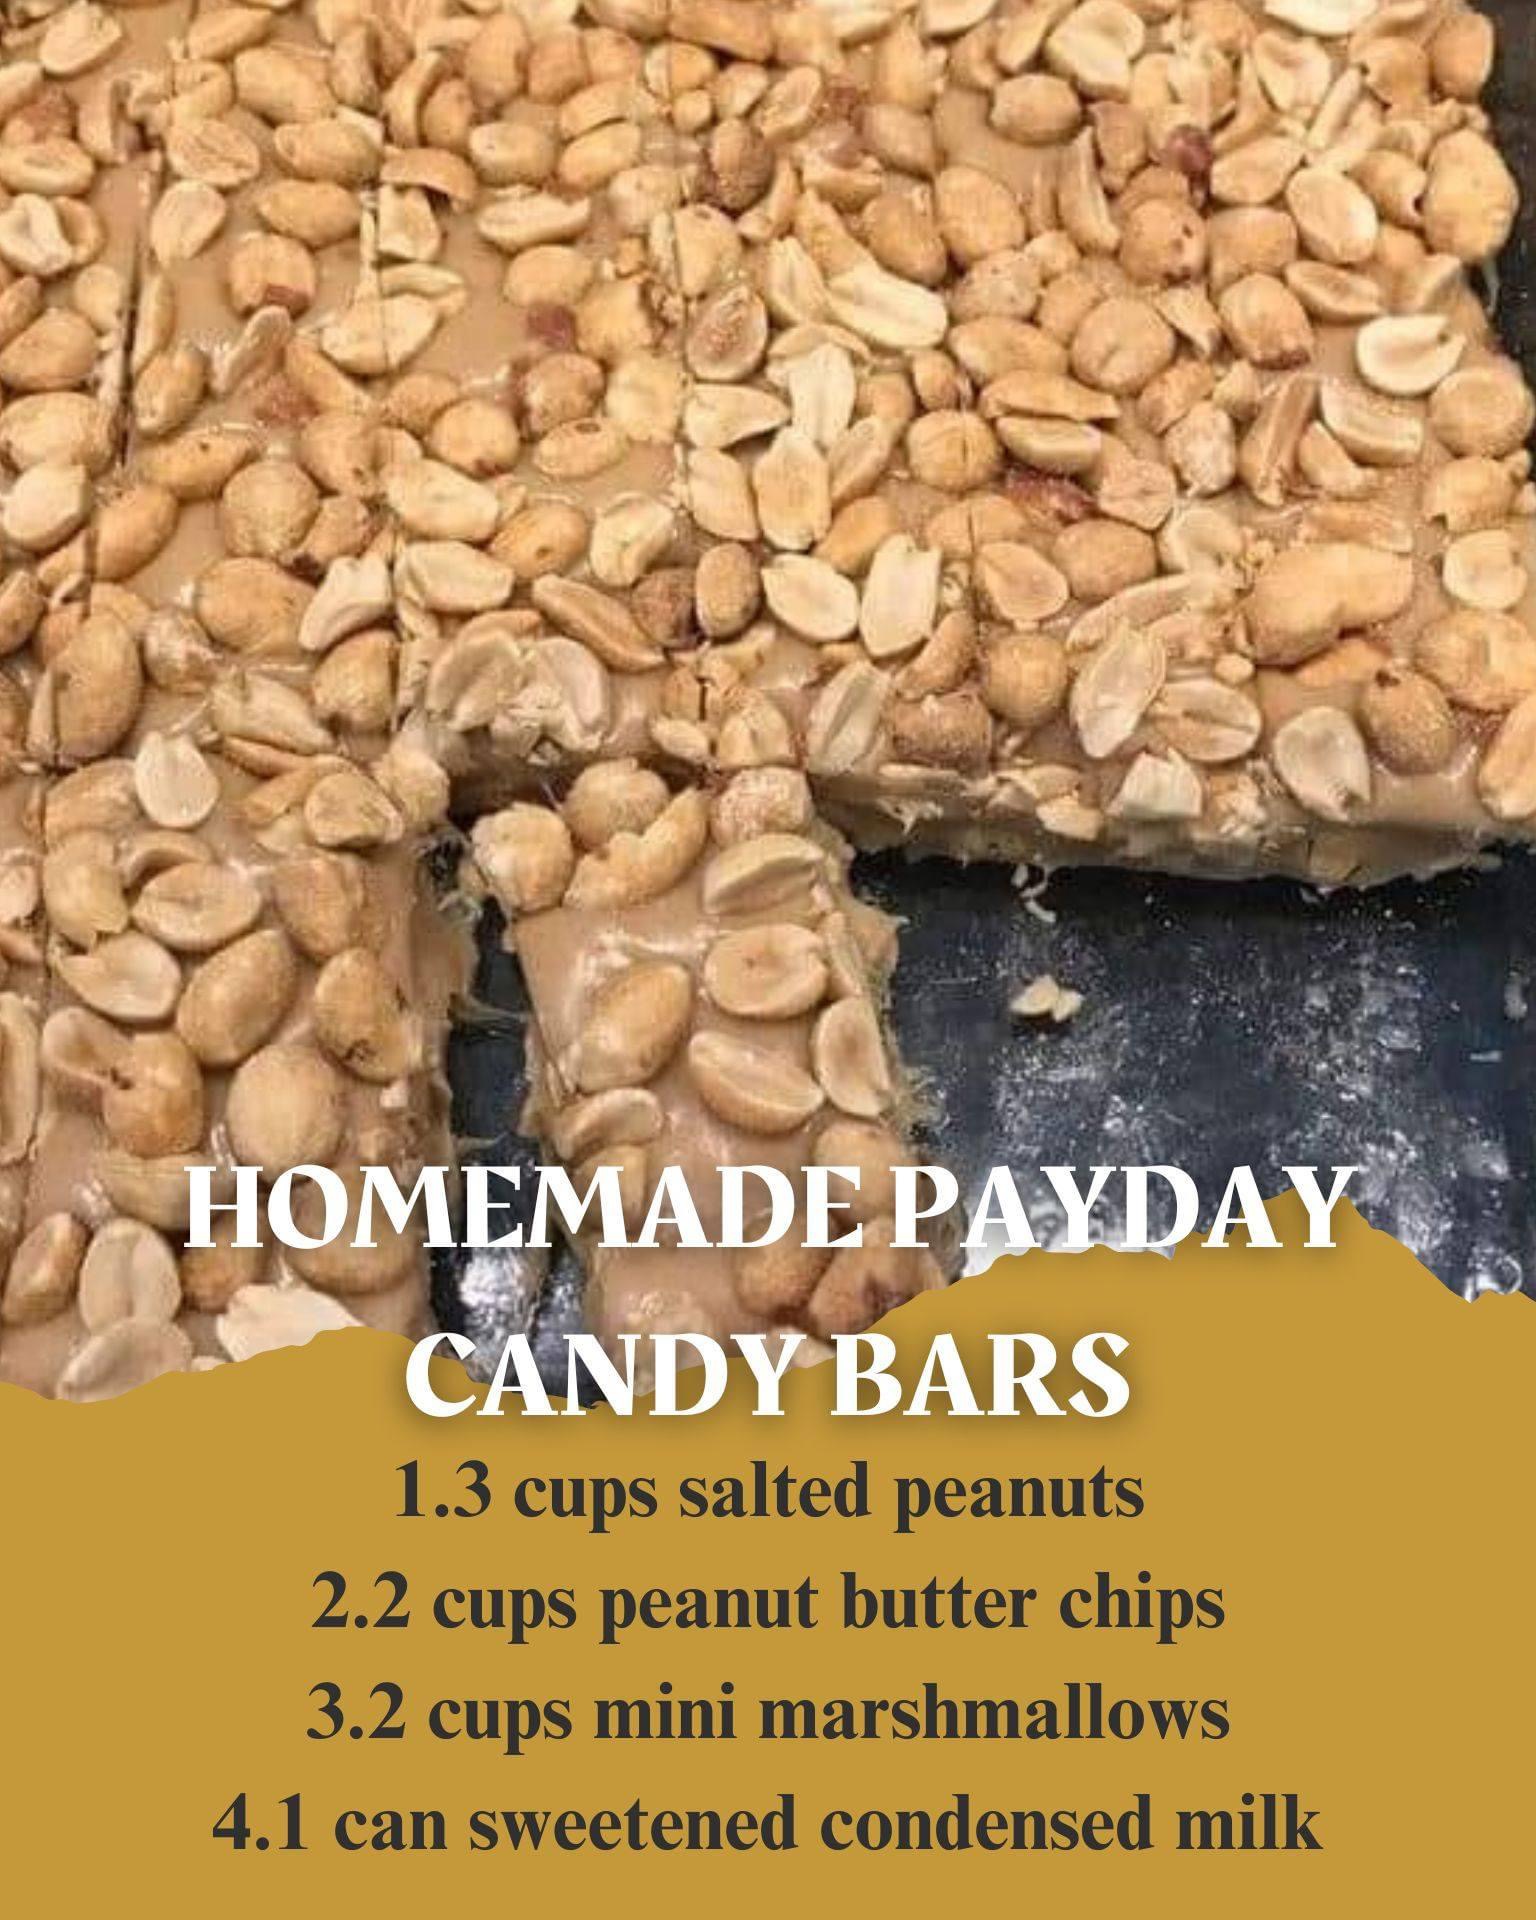 Homemade Payday Candy Bars